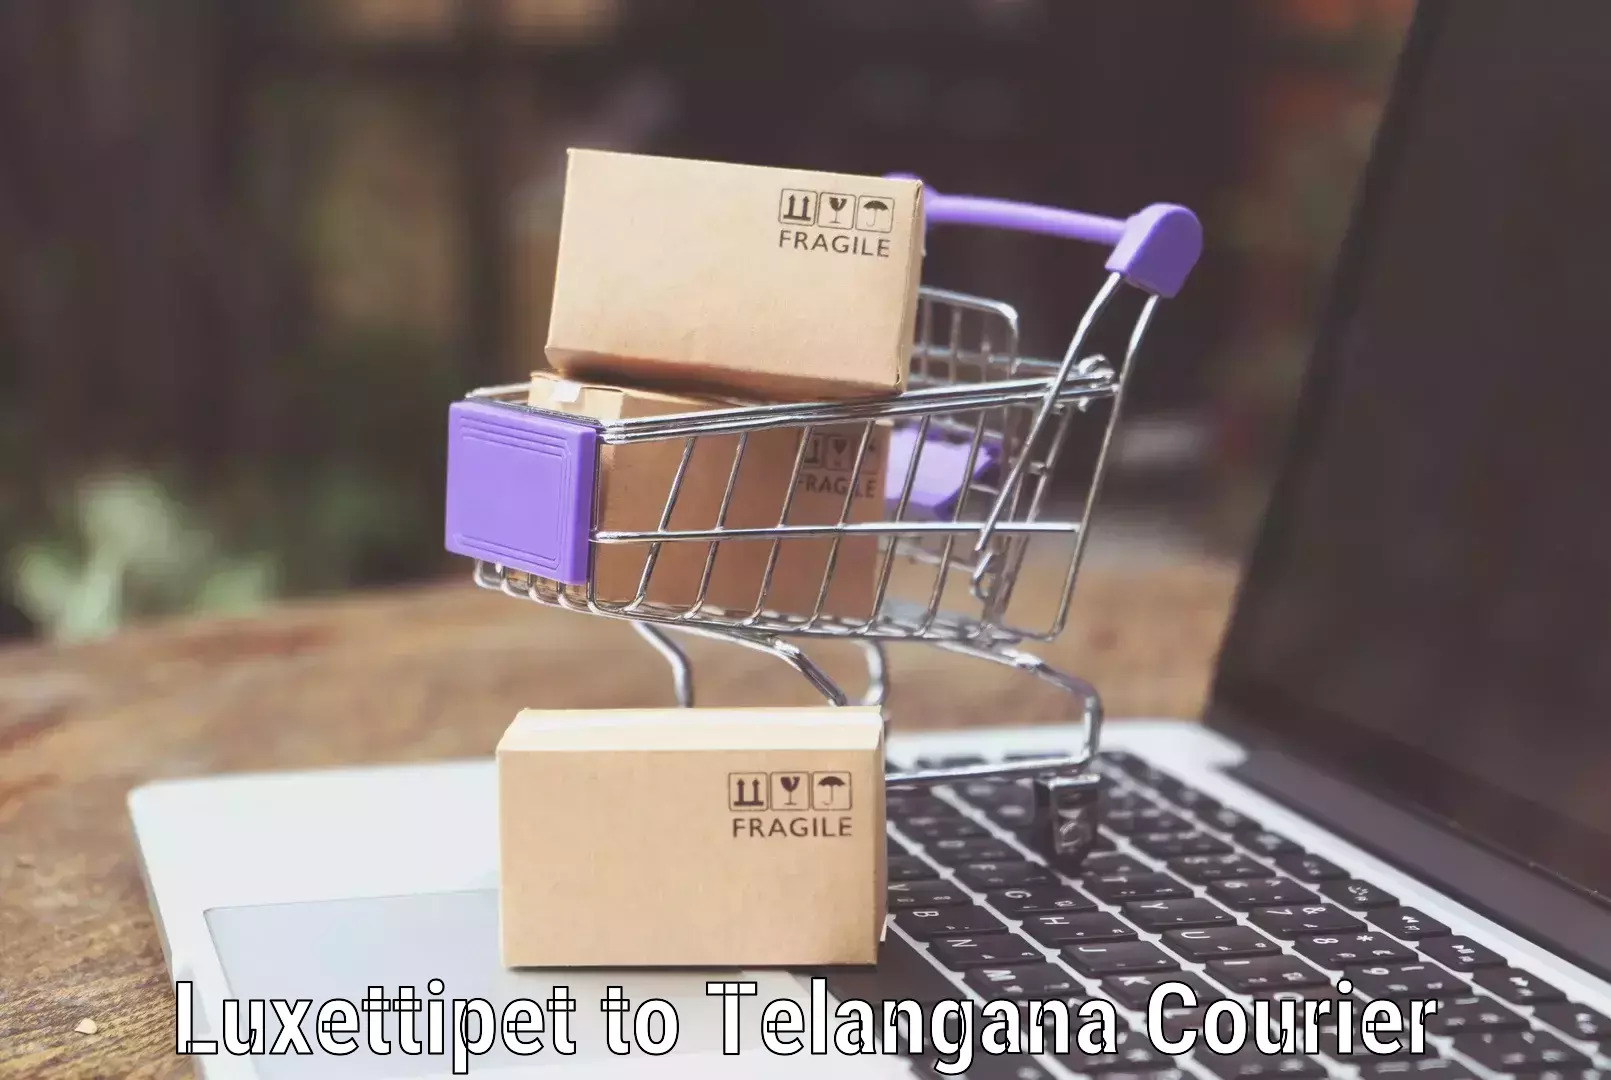 Baggage shipping calculator Luxettipet to Telangana